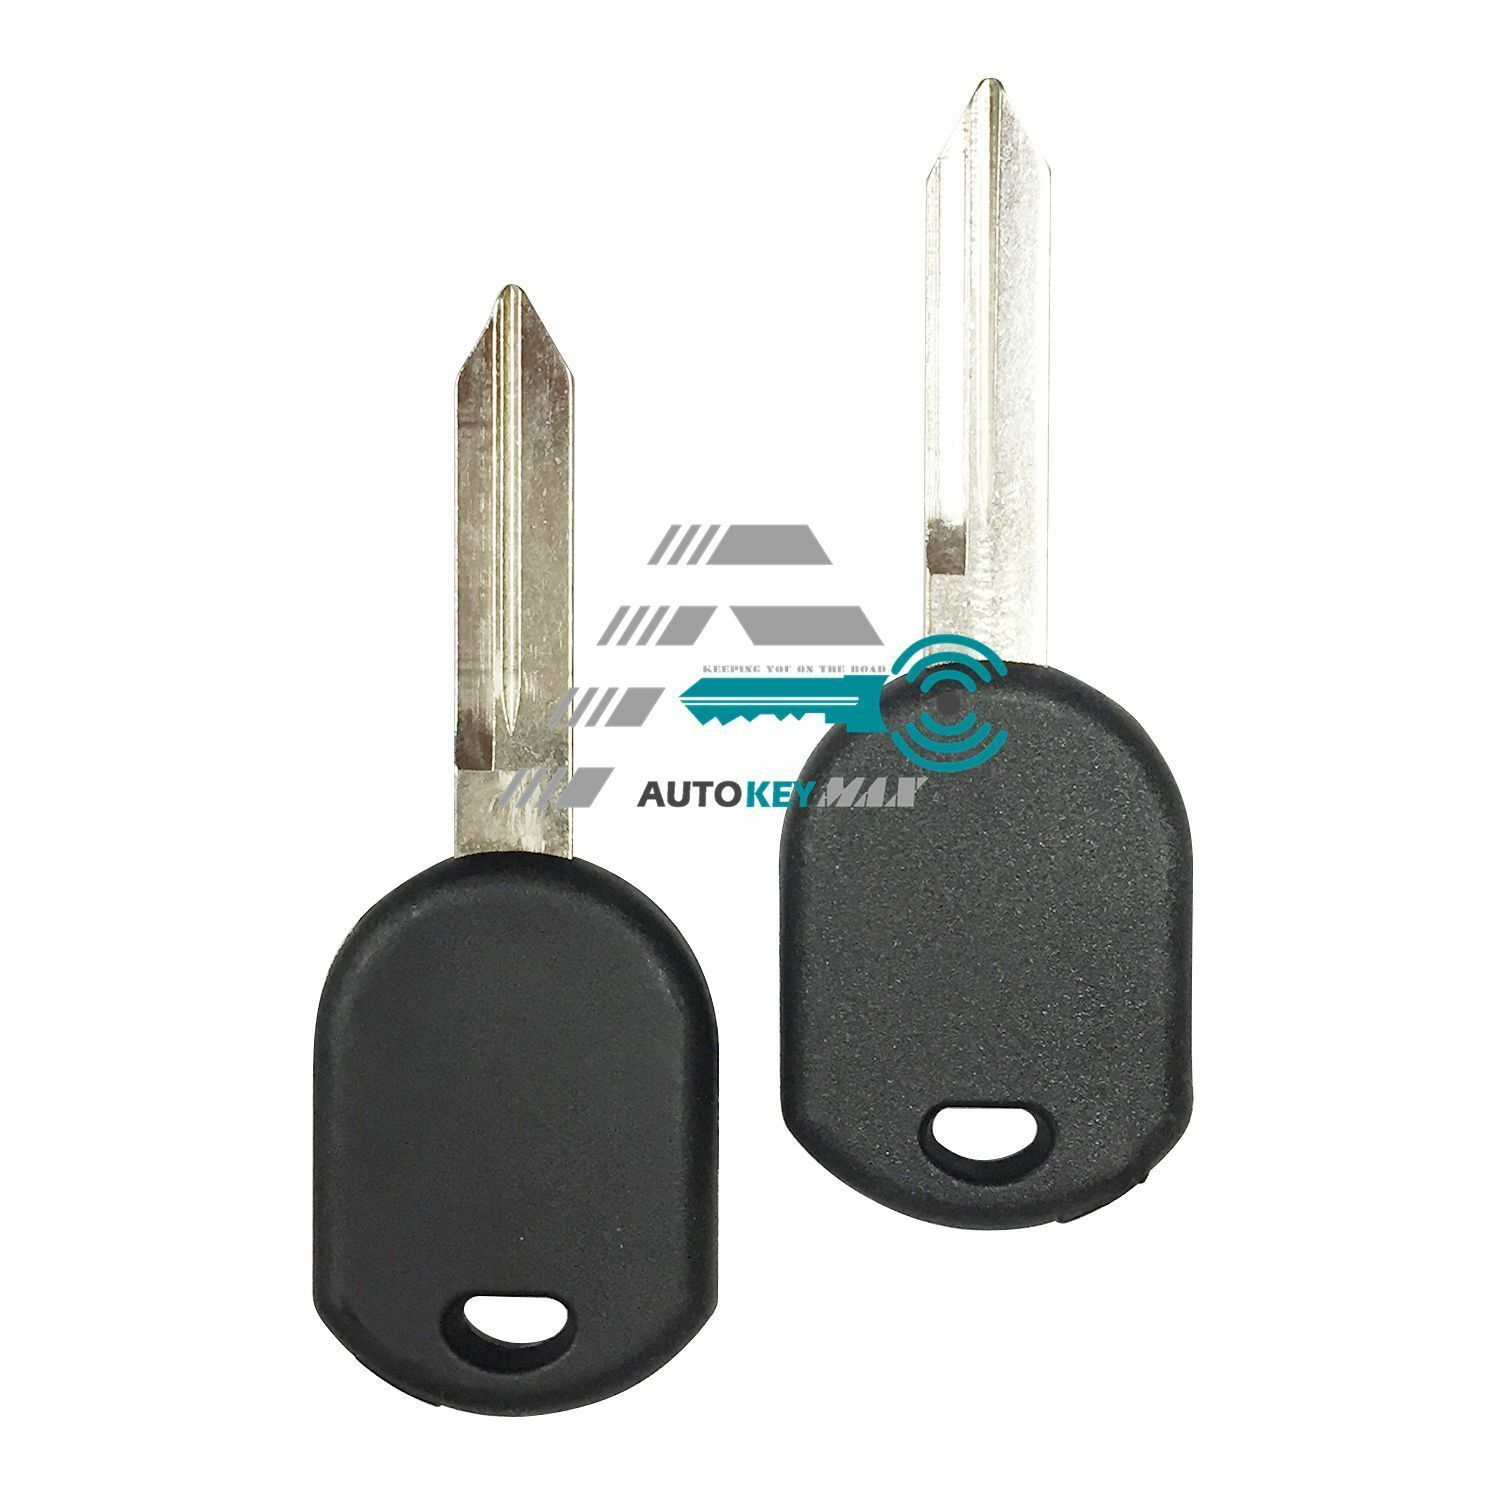 2 New Replacement Uncut Transponder chip Key For Ford F-150 Focus Fusion Mustang